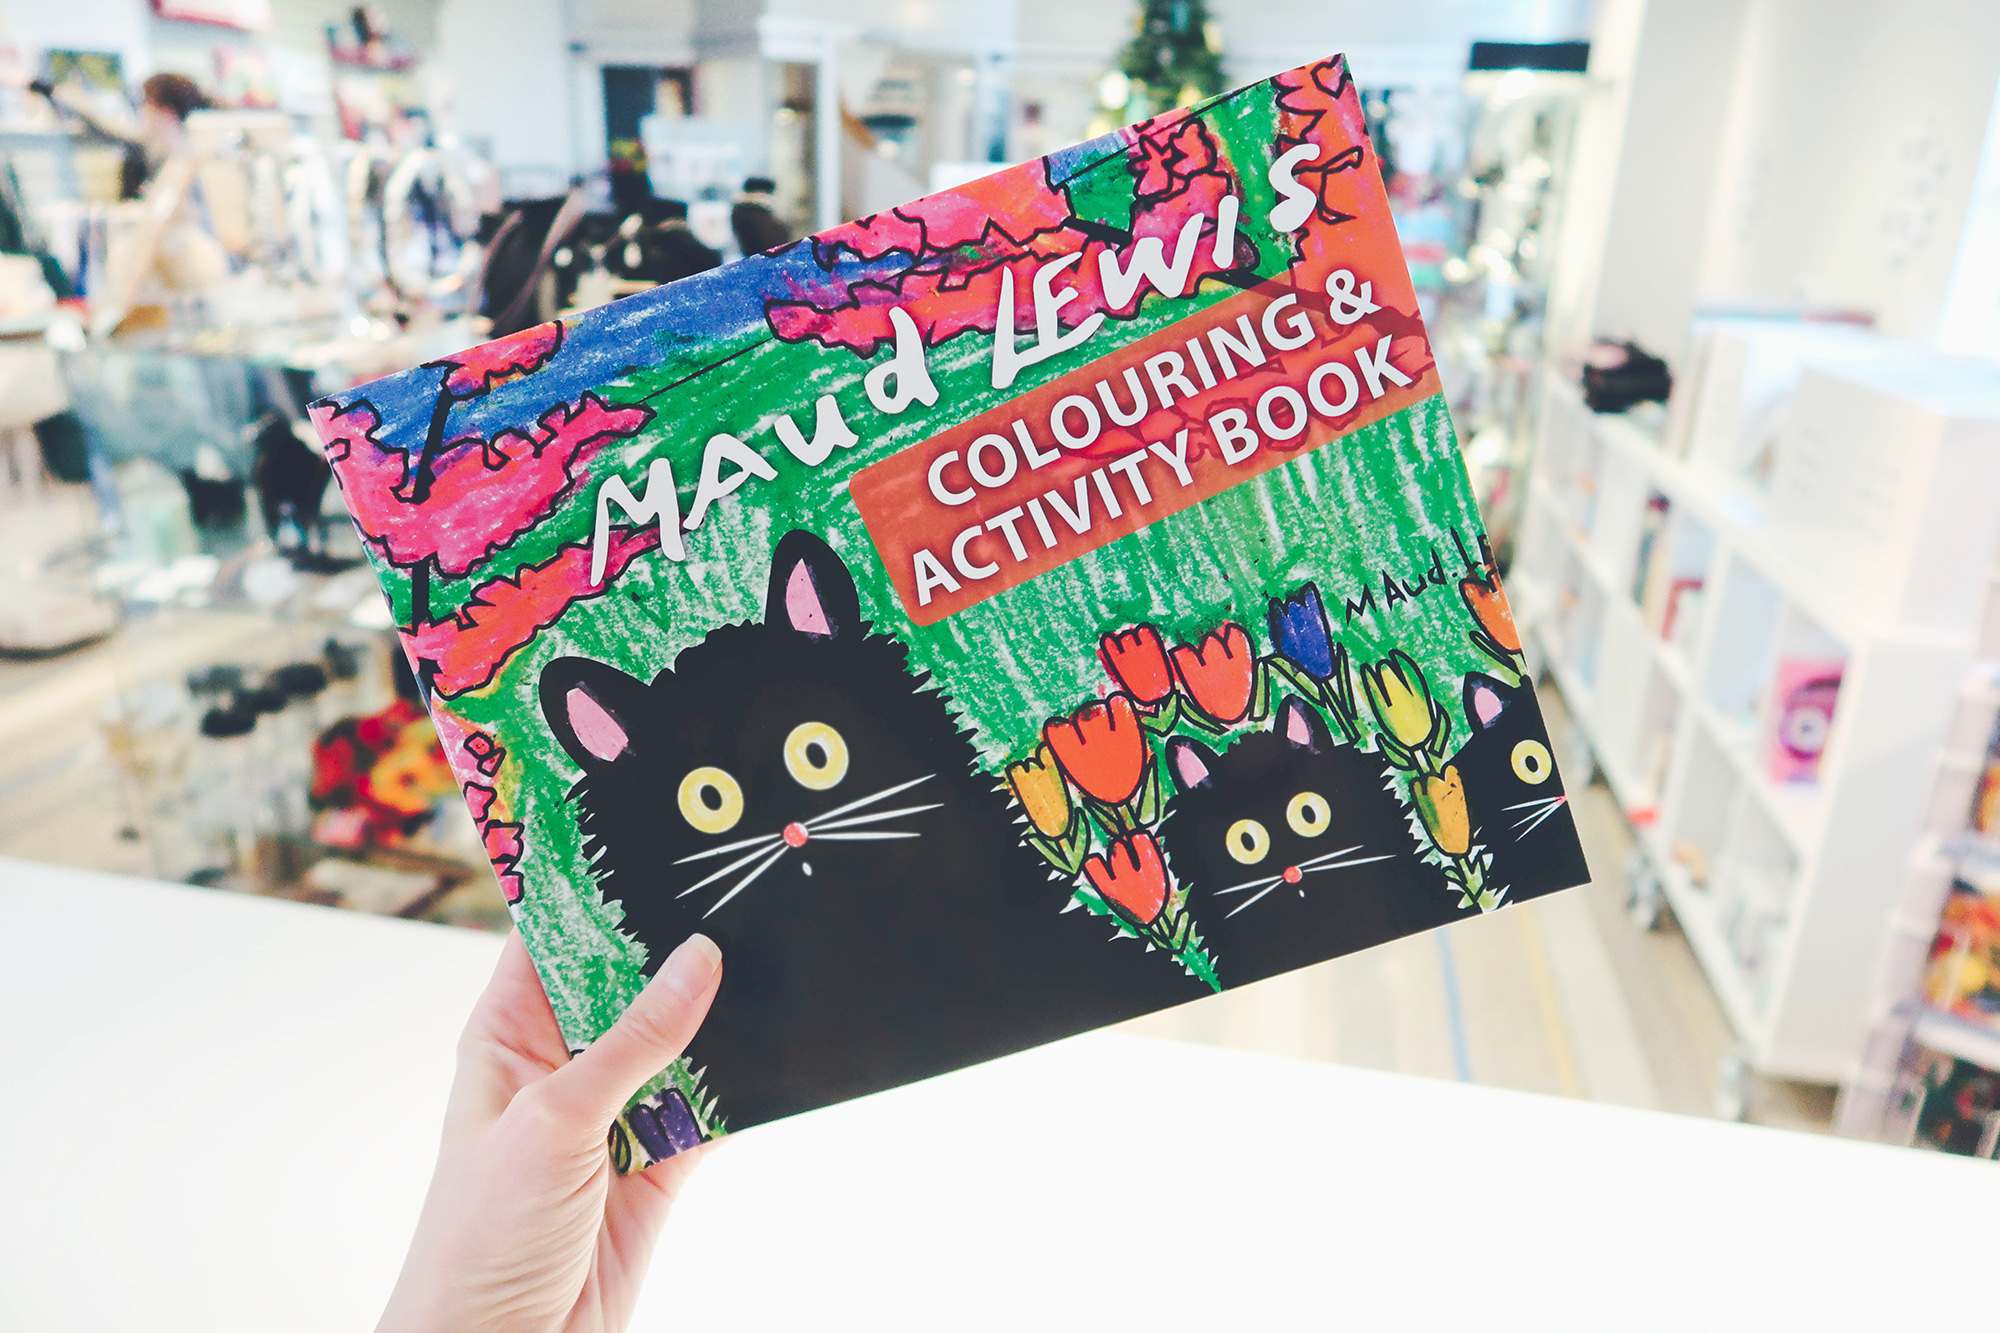 Maud Lewis Colouring book